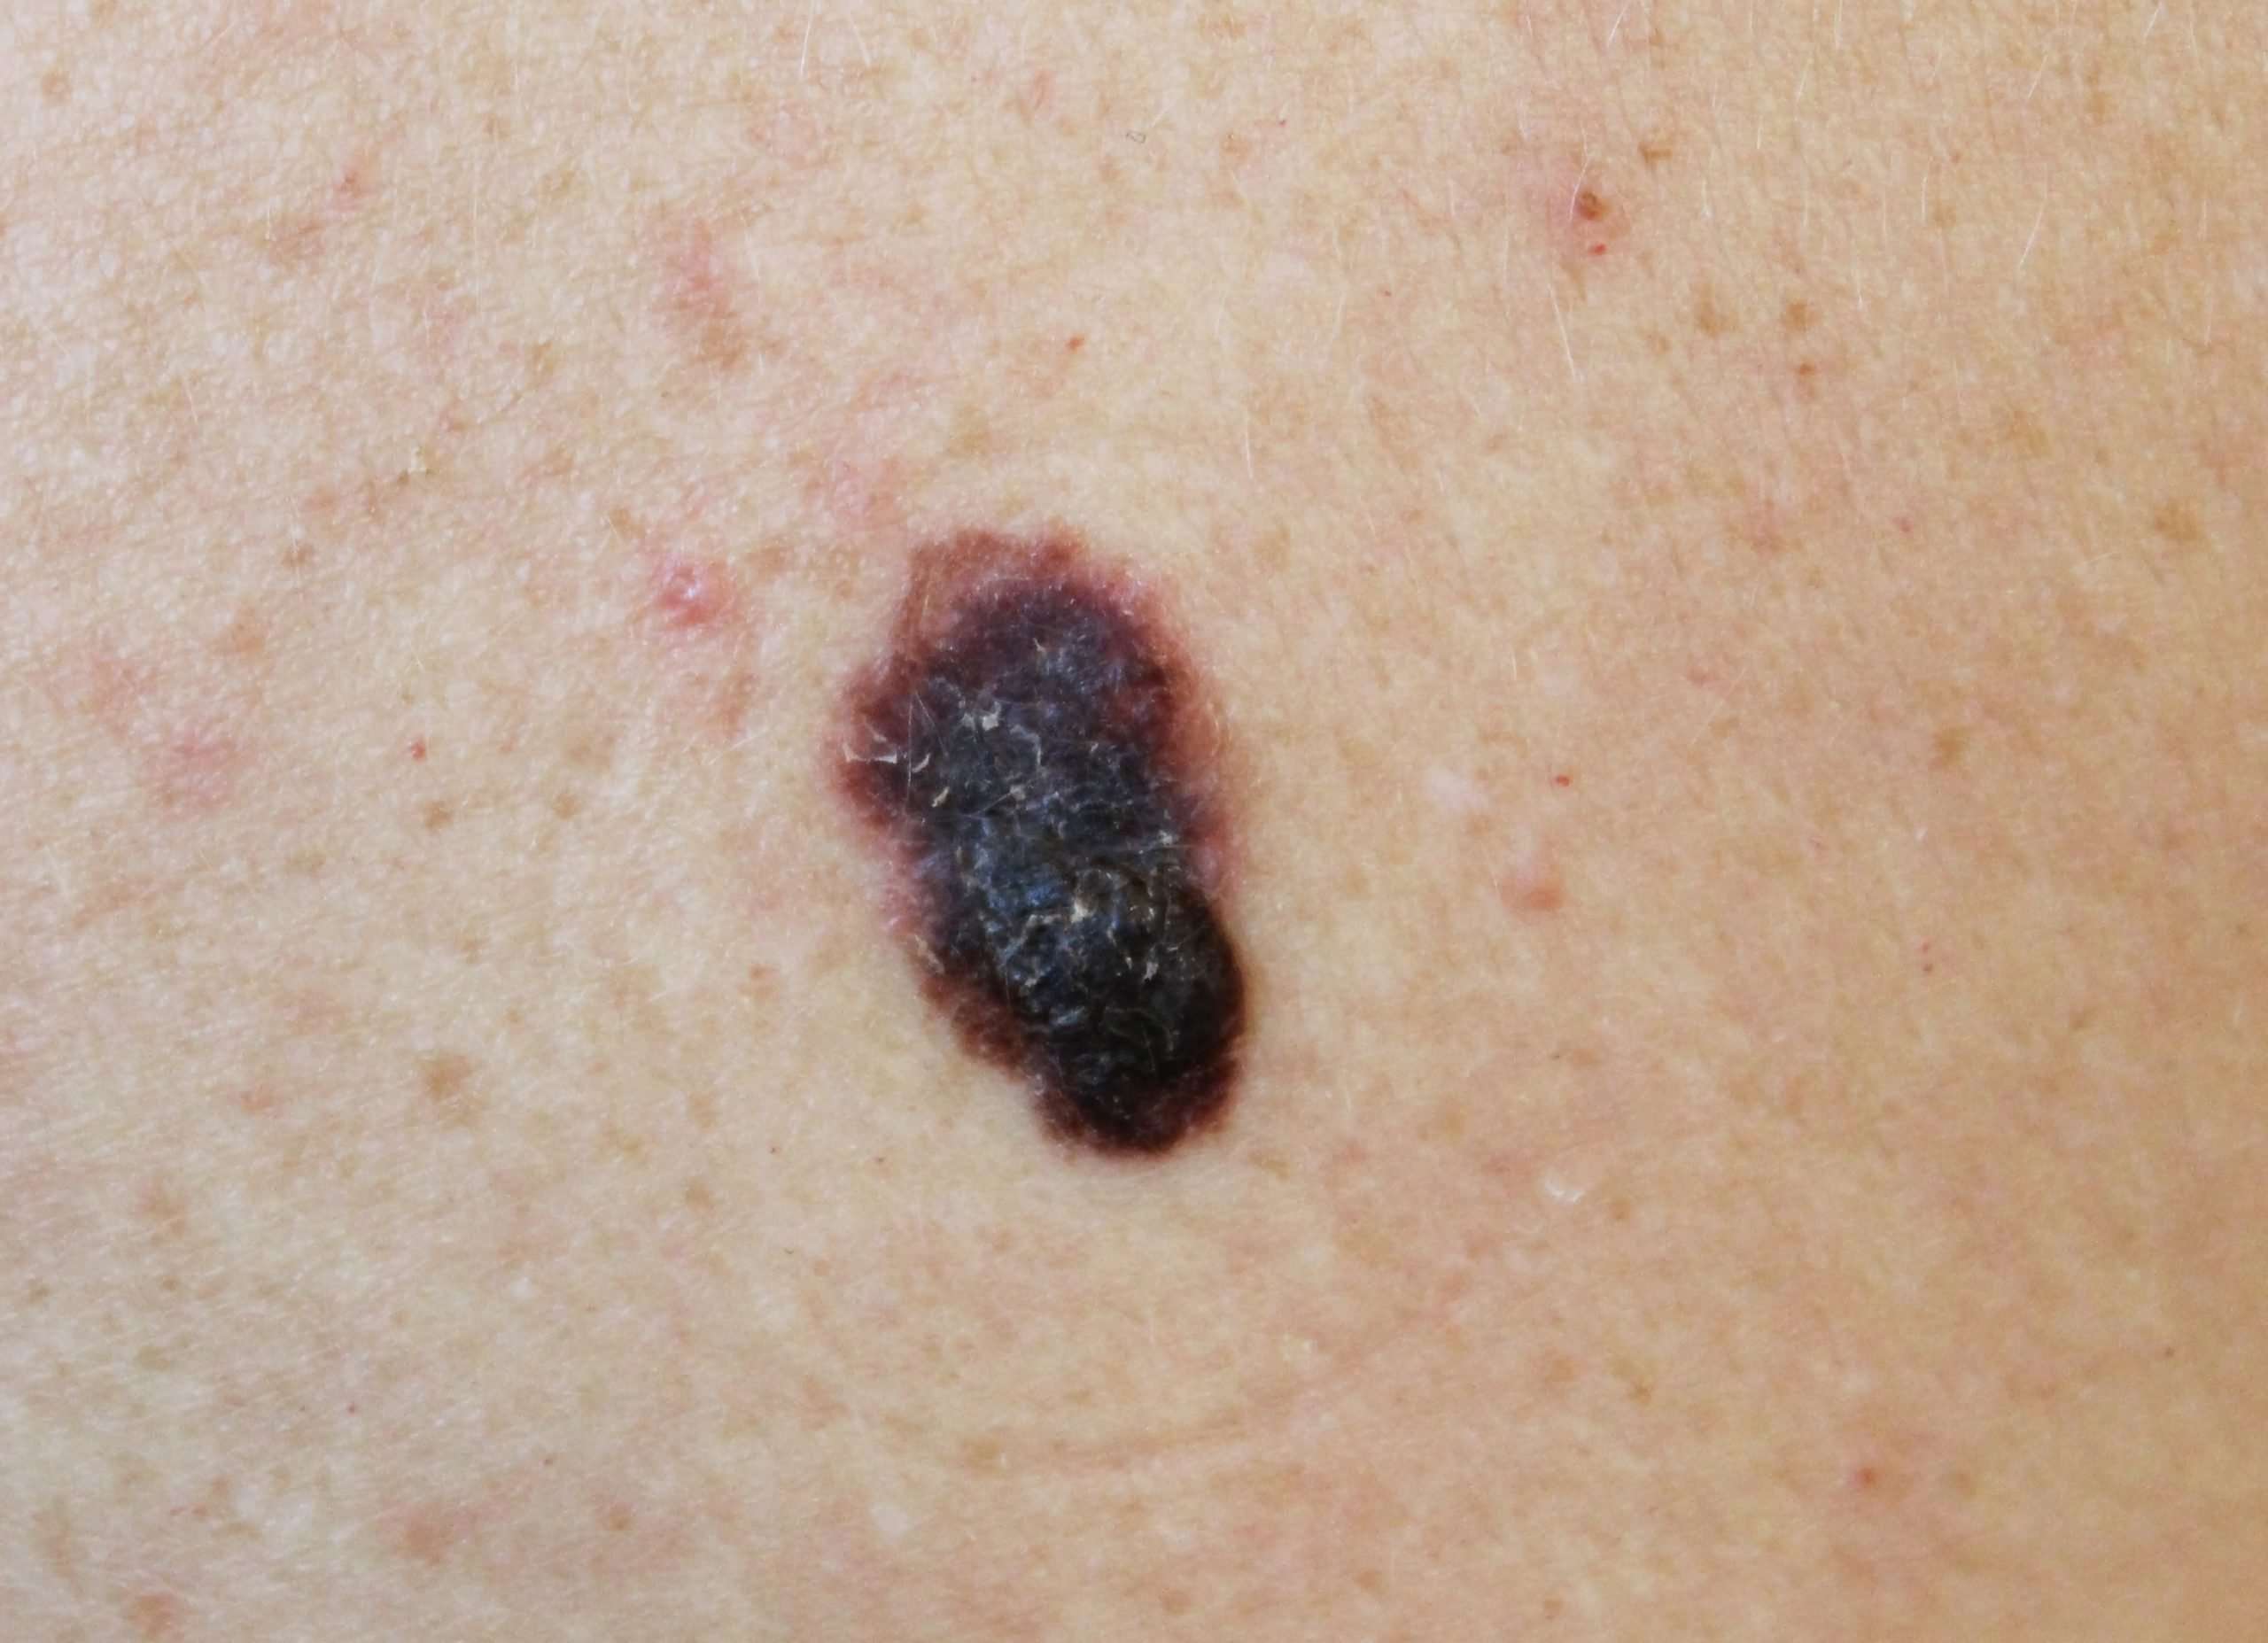 How Fast Can Melanoma Spread After It First Appears? » Scary Symptoms